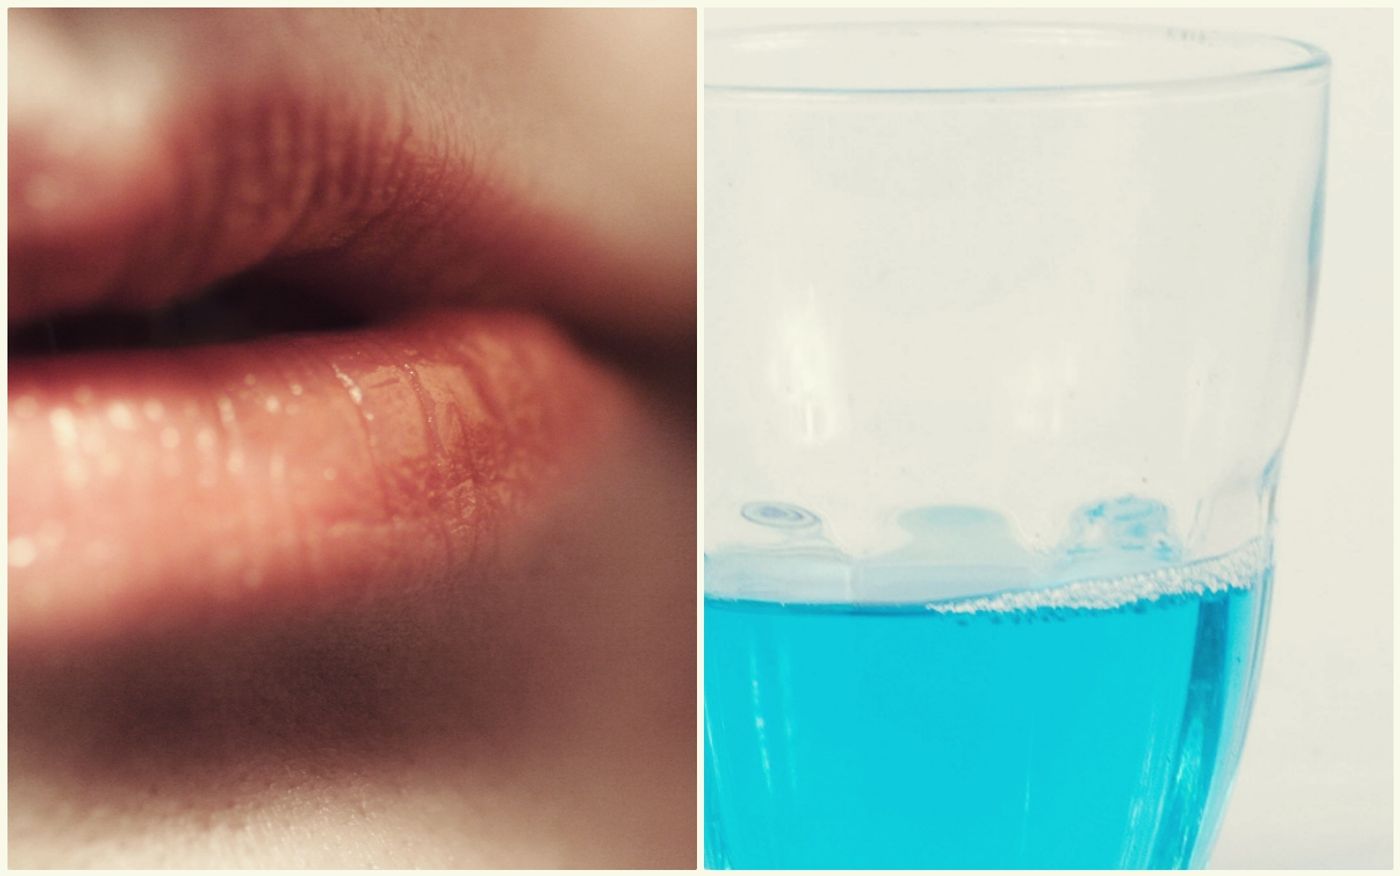 Credit: collage, public domain image of mouth and image of oral rinse via Marco Verch on Flickr, CC 2.0